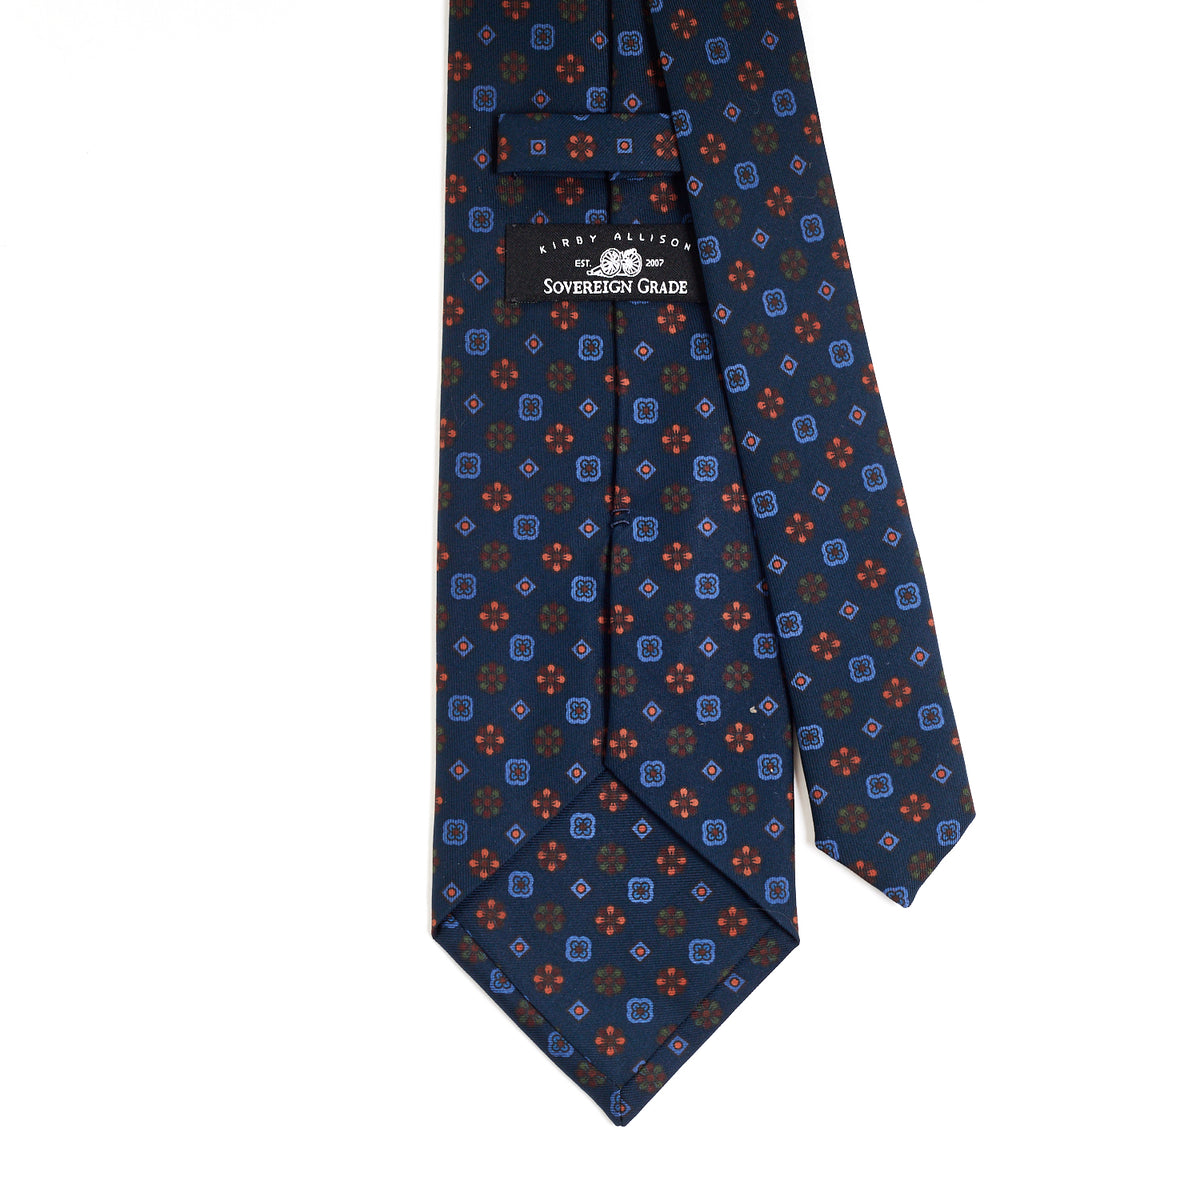 A Sovereign Grade Dark Navy Mixed Floret Ancient Madder Tie from KirbyAllison.com, with a blue and orange pattern of highest quality.